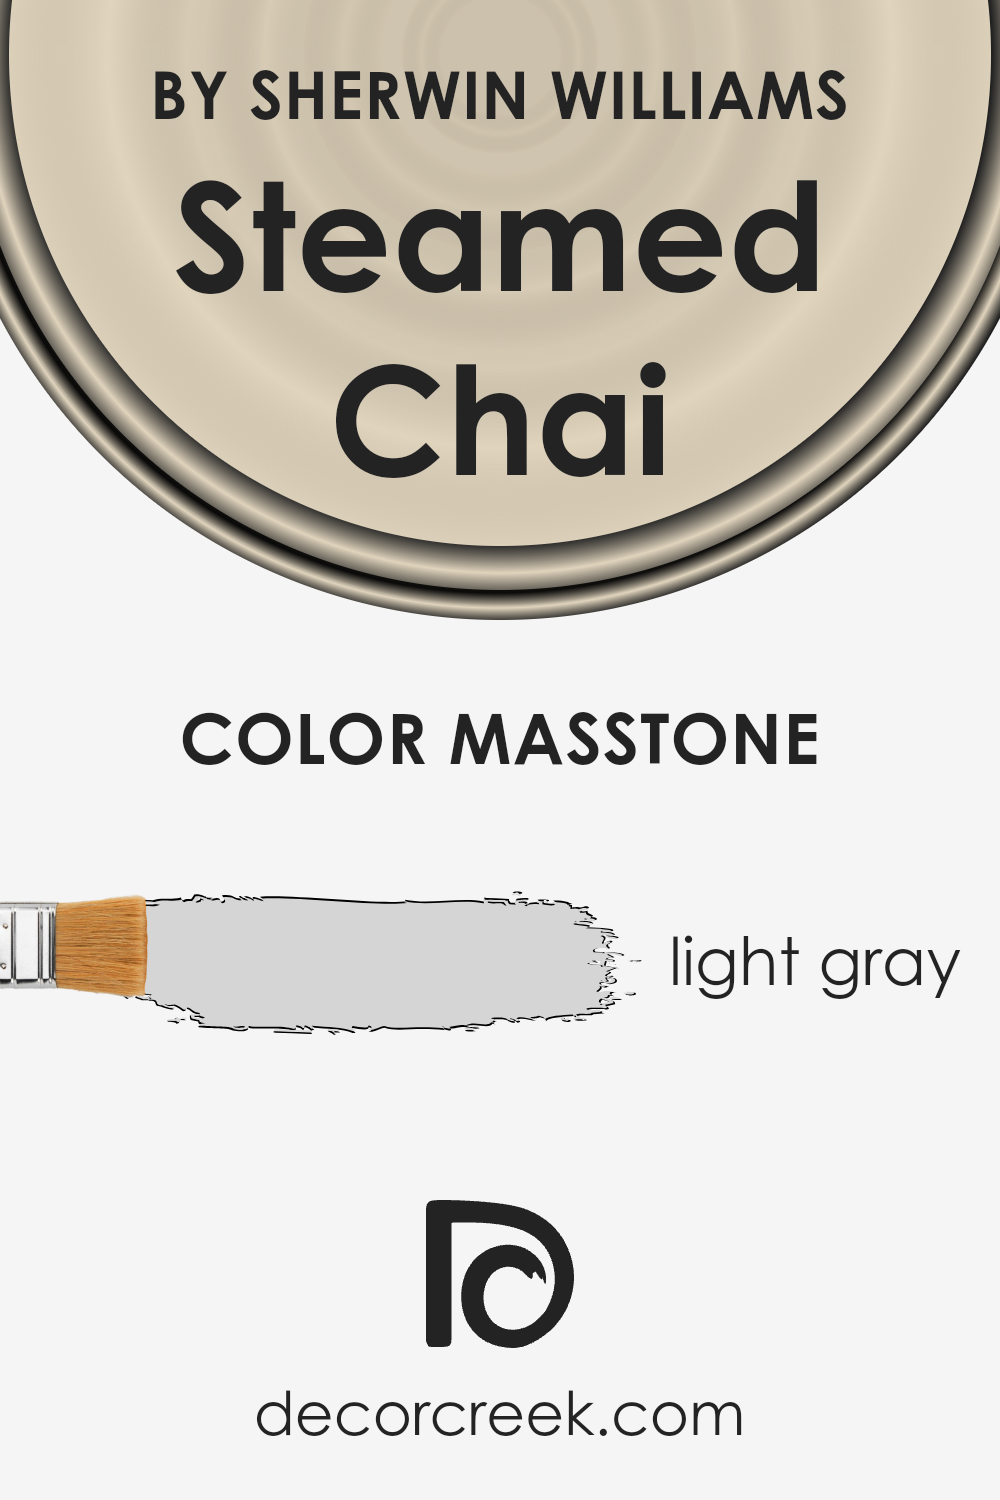 what_is_the_masstone_of_steamed_chai_sw_9509